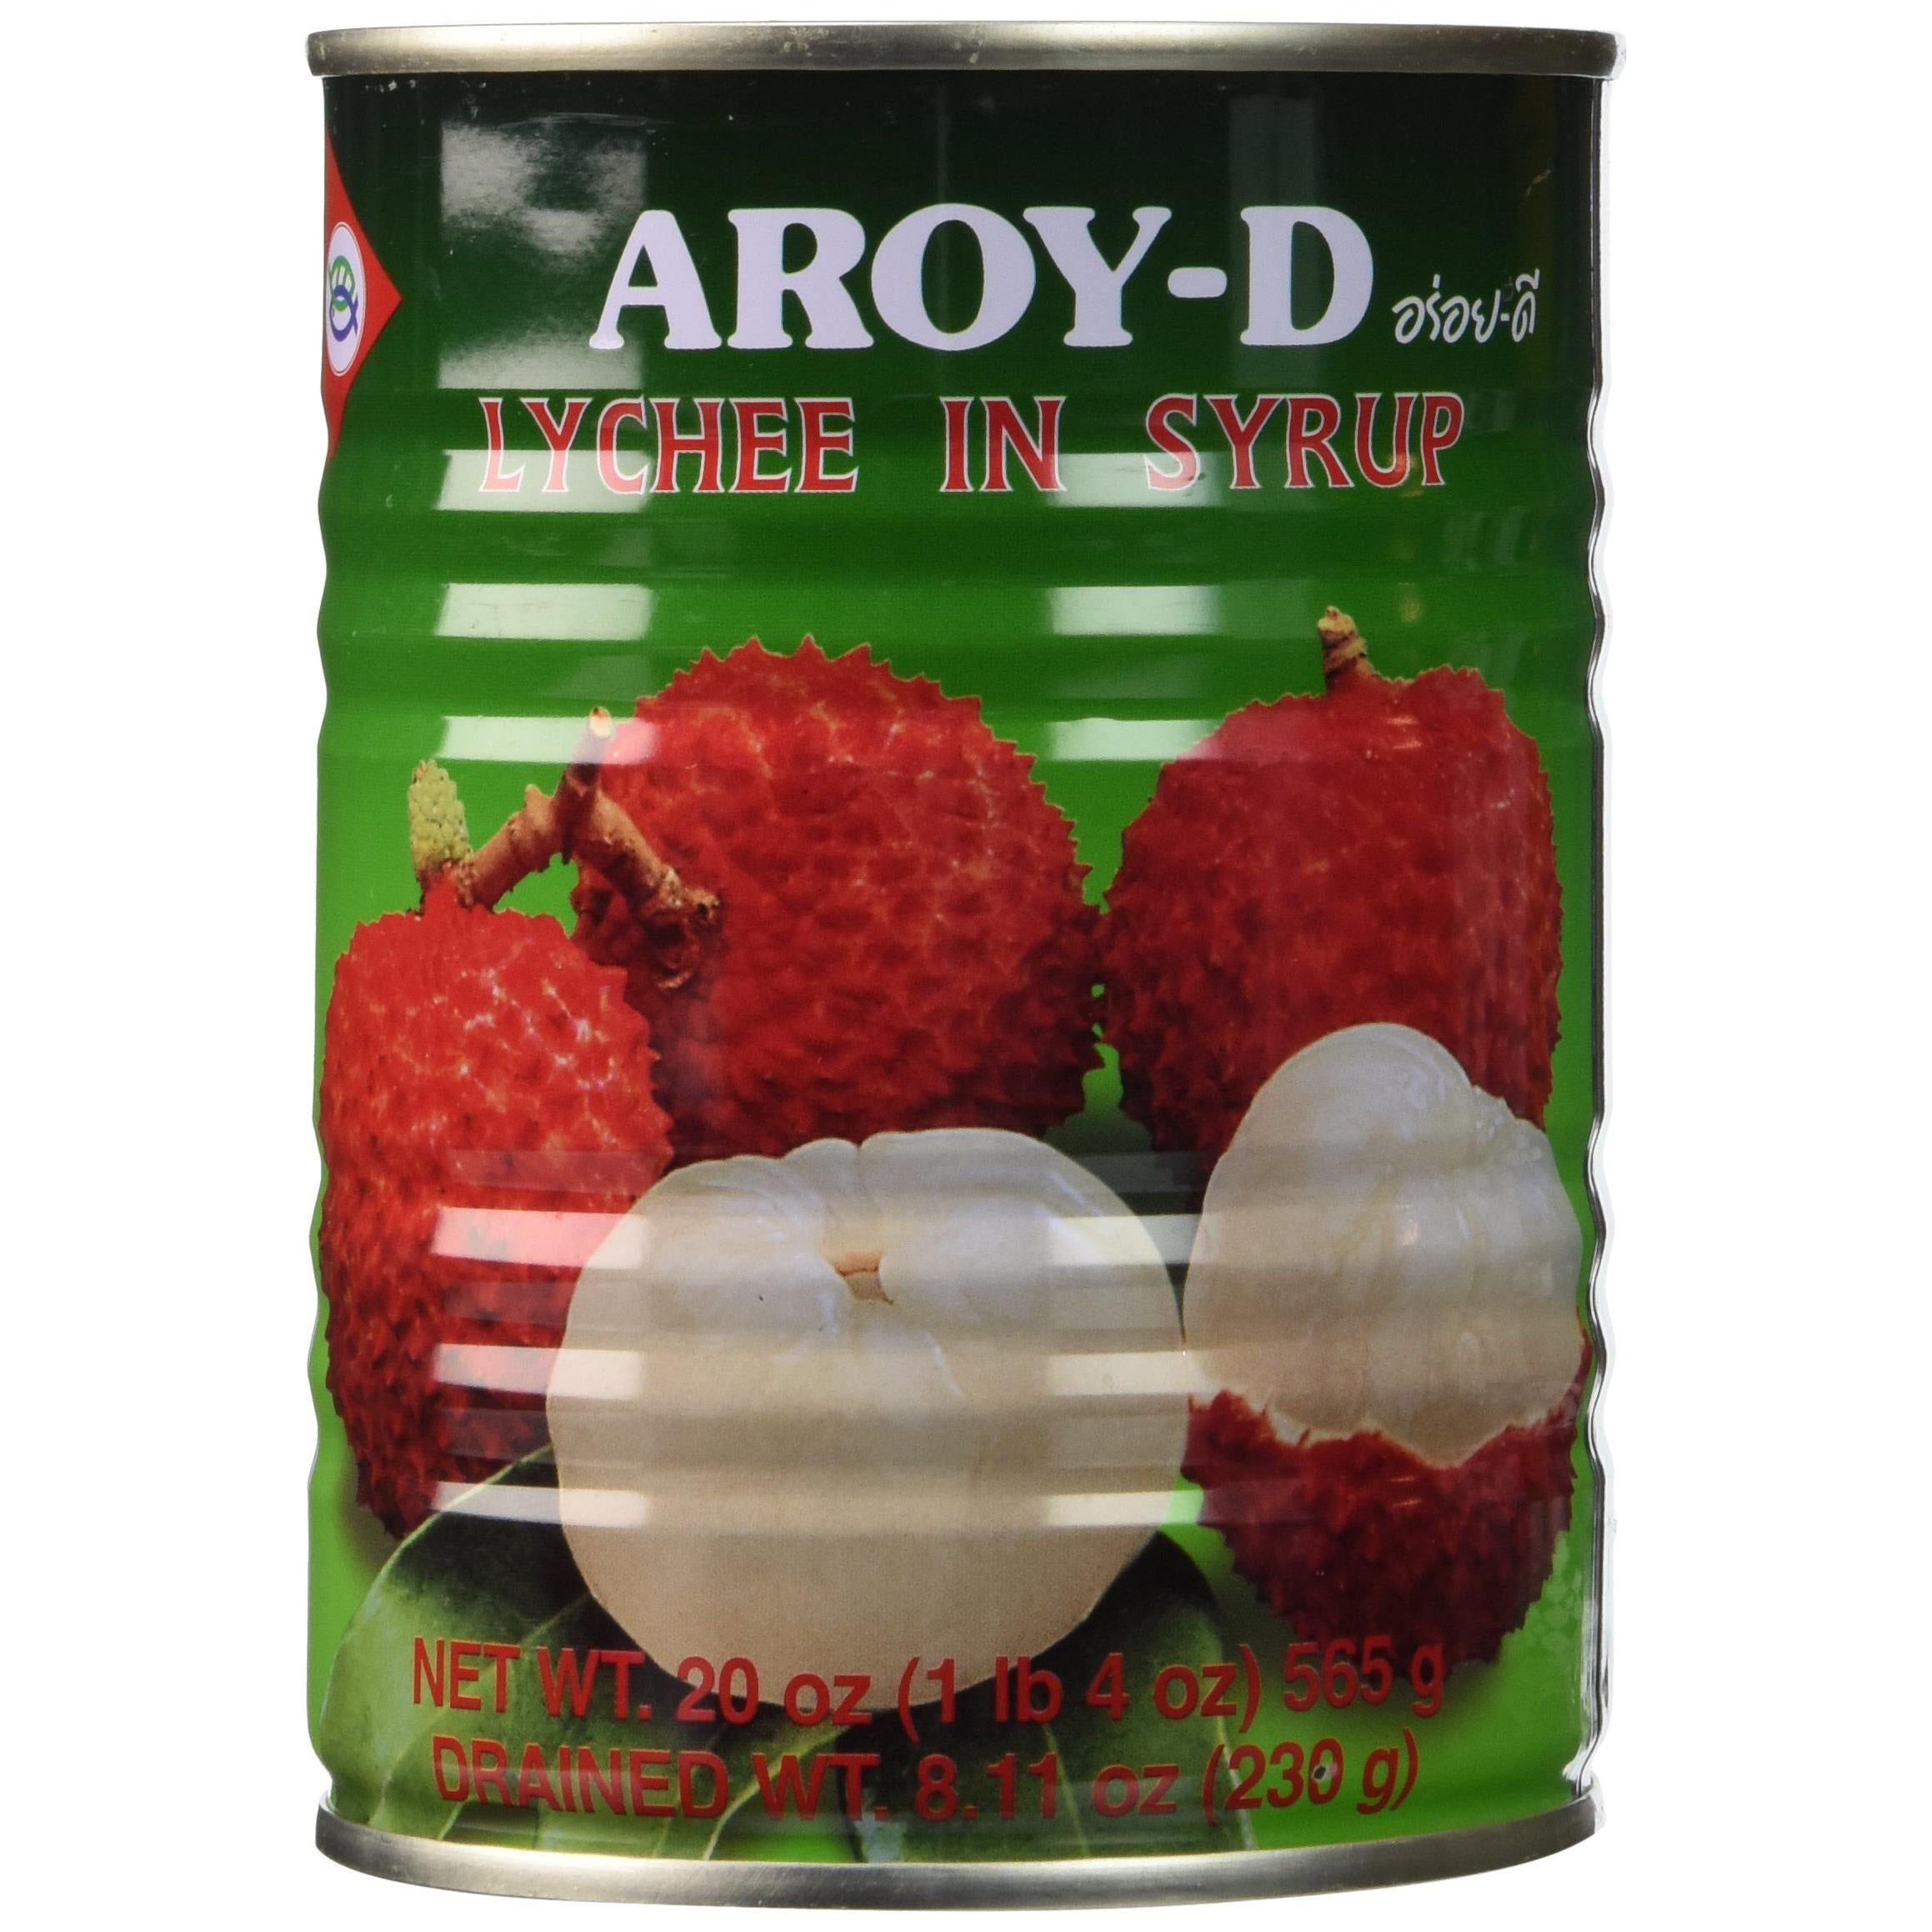 Lychee in Syrup, 20 Oz (Pack of 3)